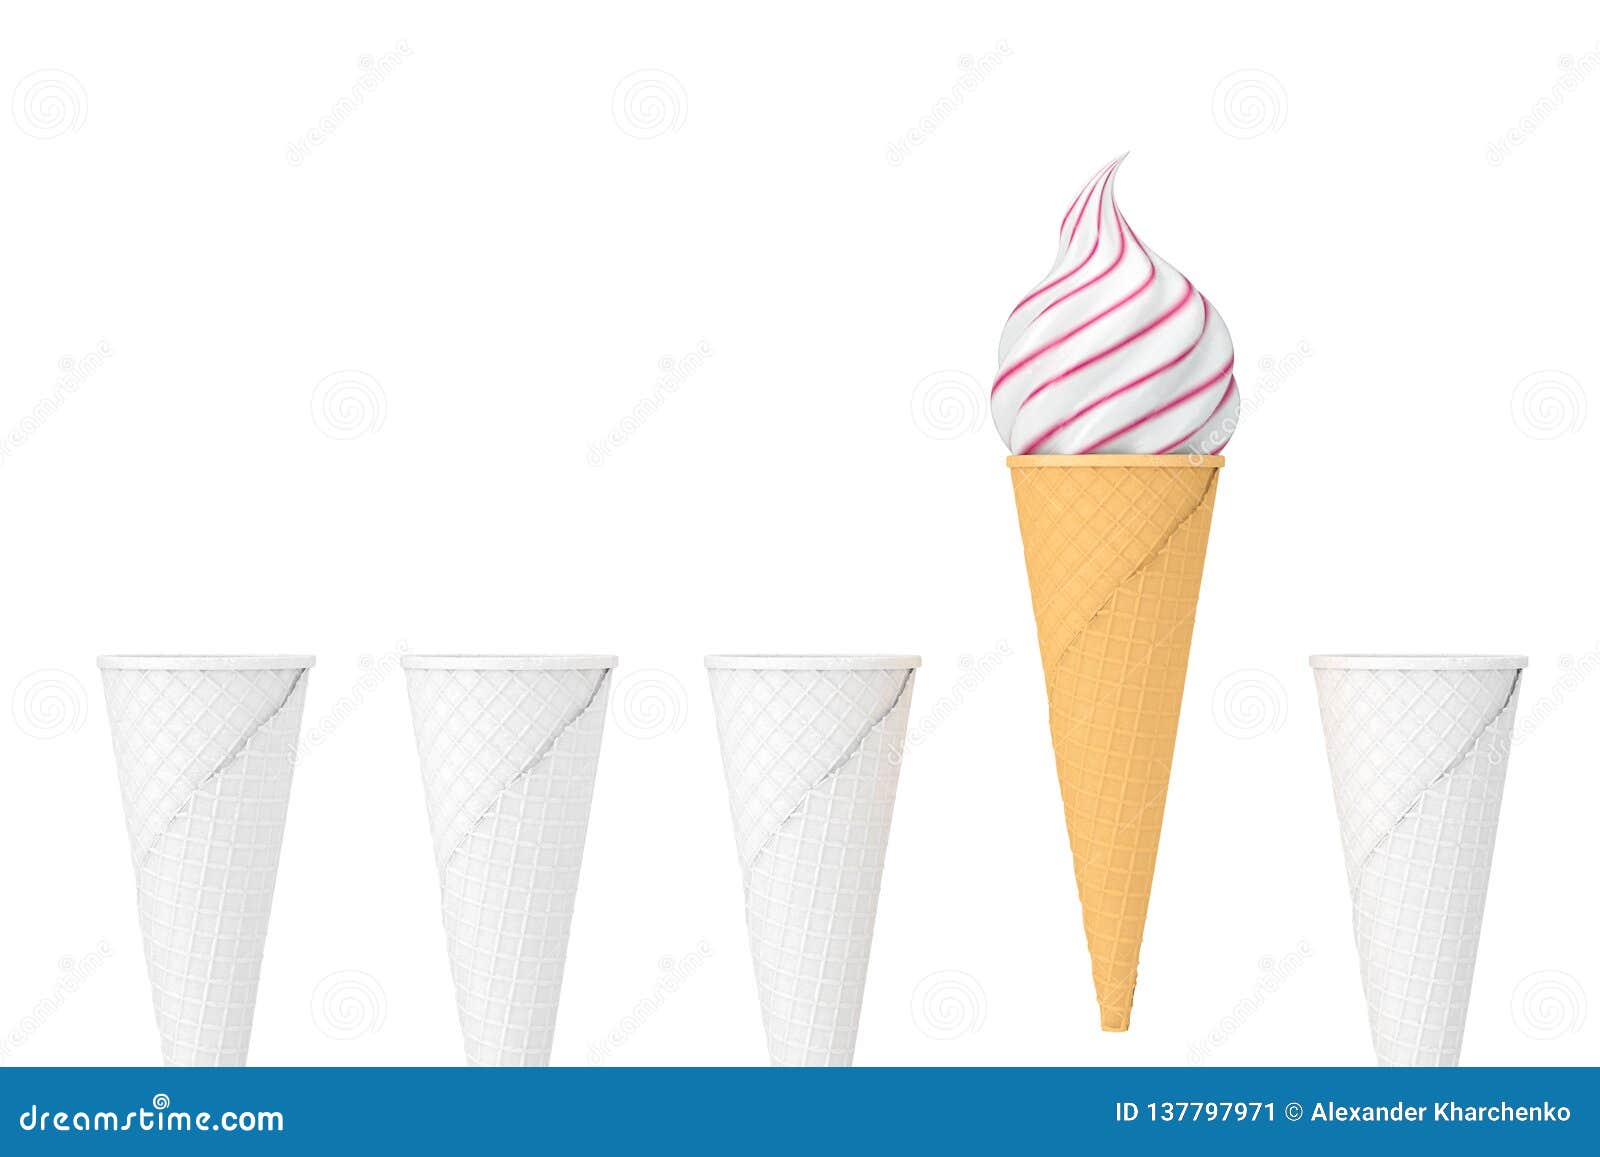 853 Mini Ice Cream Cone Images, Stock Photos, 3D objects